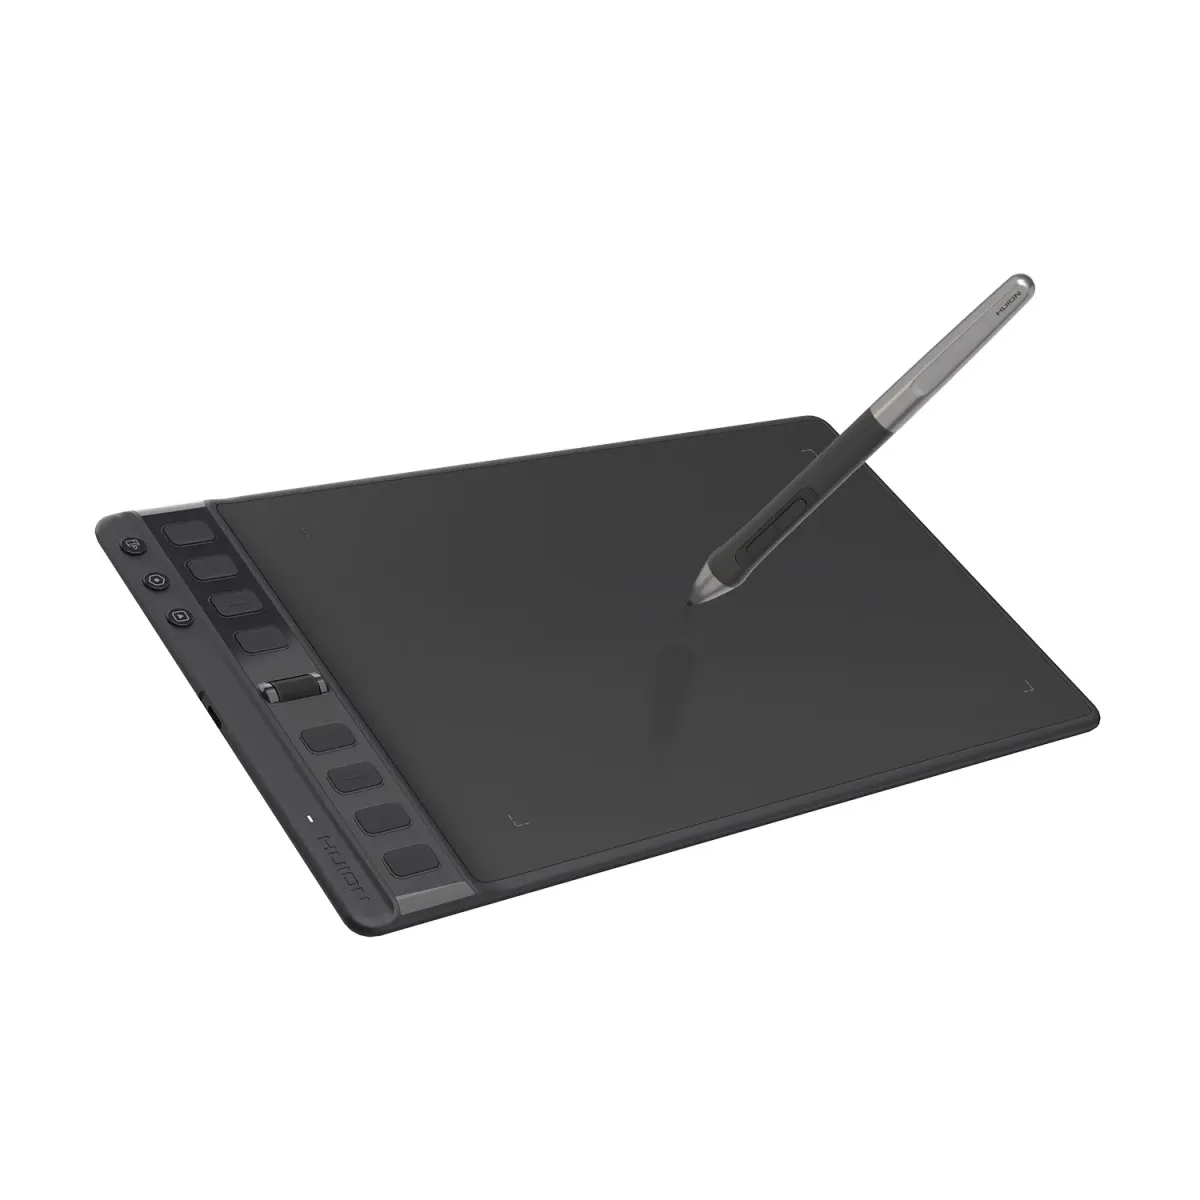 Huion Inspiroy 2 M H951P Medium-Size Drawing Pad with Stylus Pen 